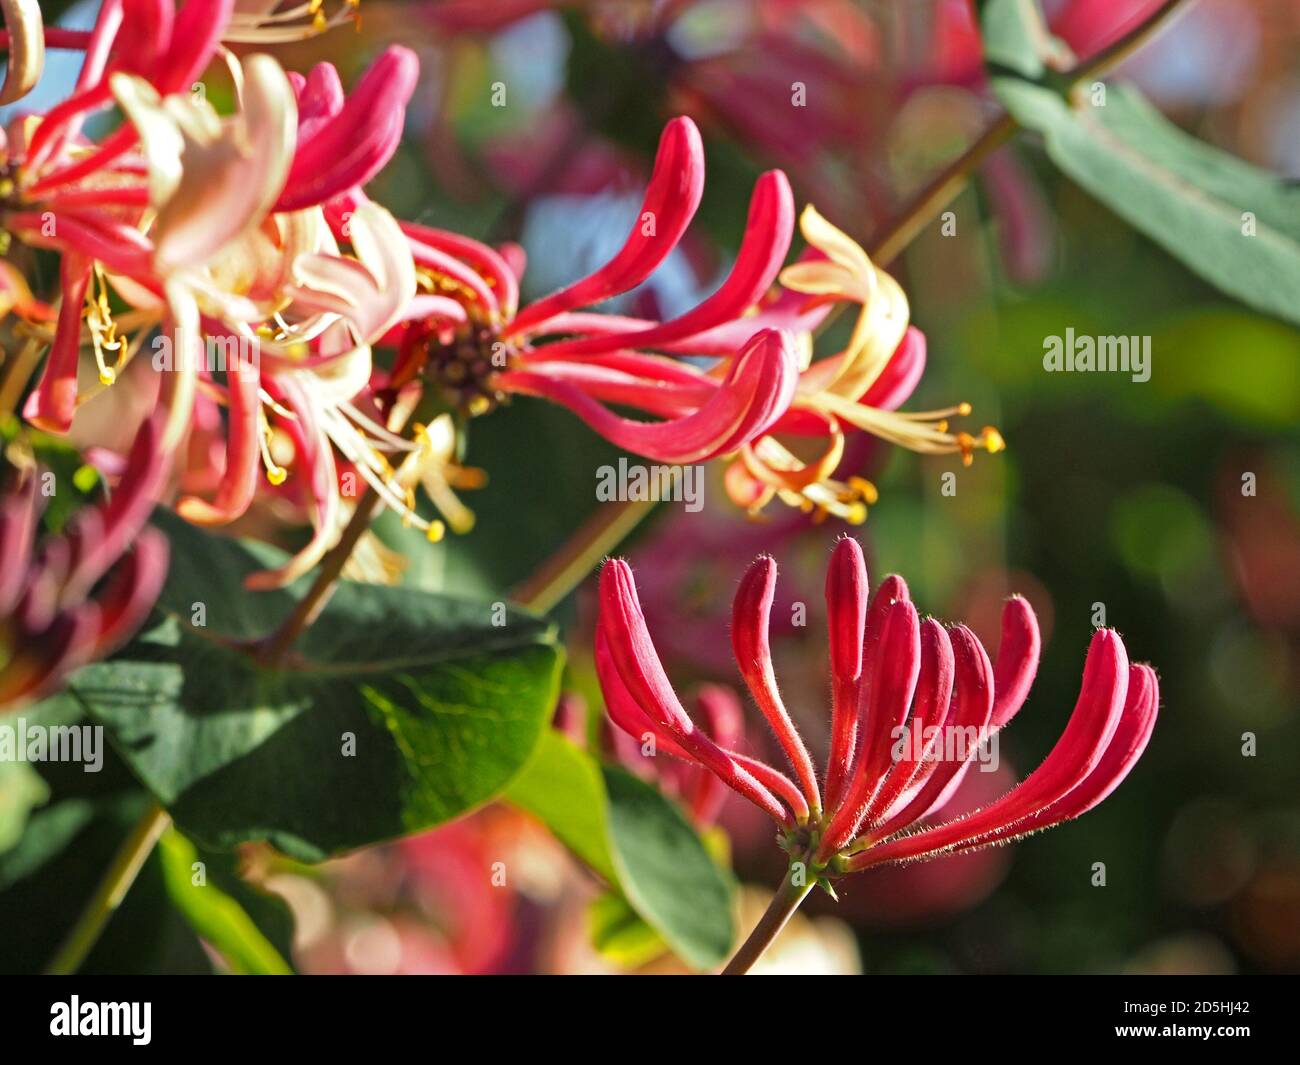 vibrant pink yellow & cream flowers and buds of Common or European Honeysuckle (Lonicera periclymenum) growing wild from a garden Cumbria, England, UK Stock Photo